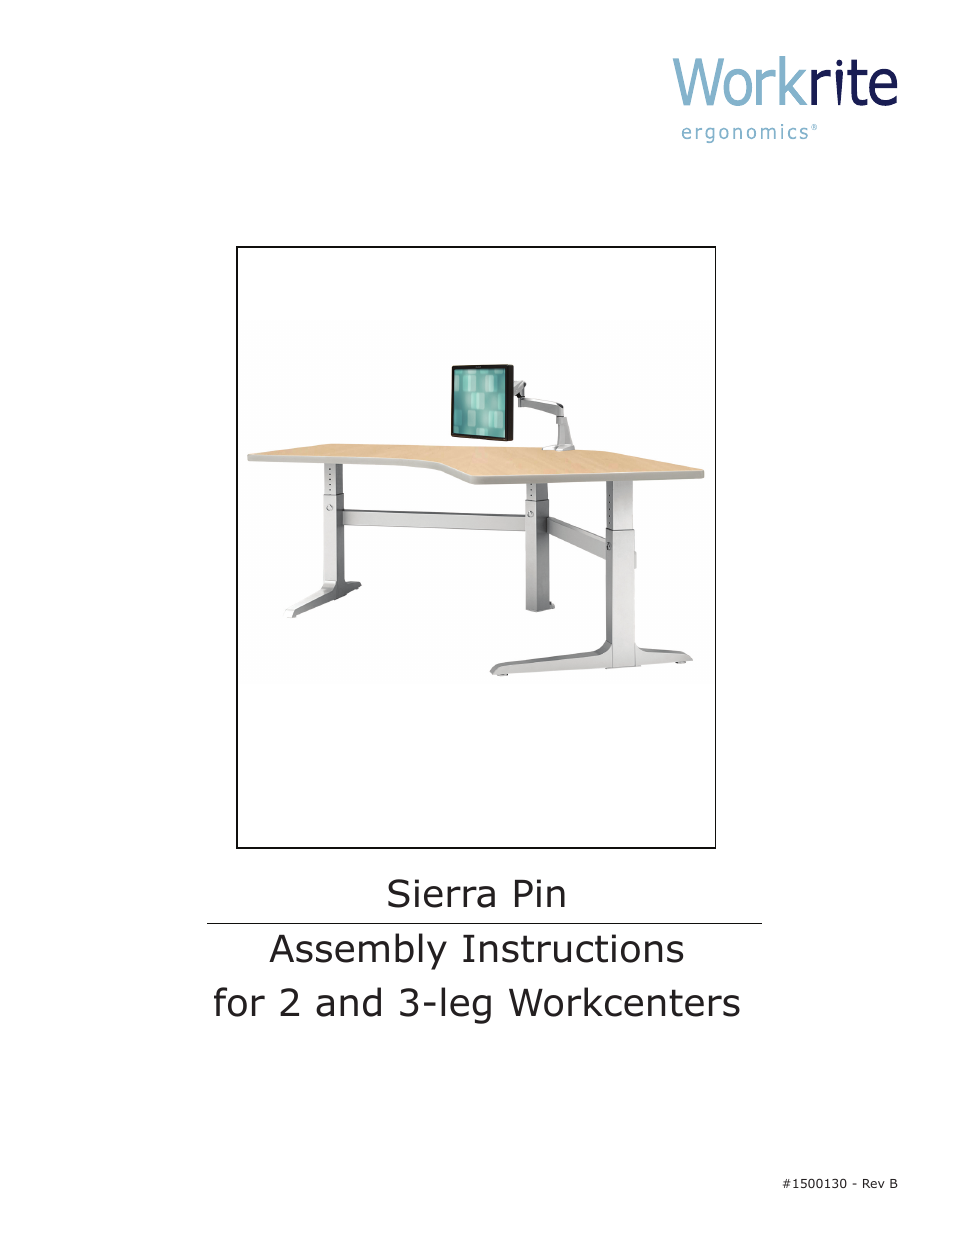 Sierra Pin Crank Assembly Instructions for 3-leg Workcenters